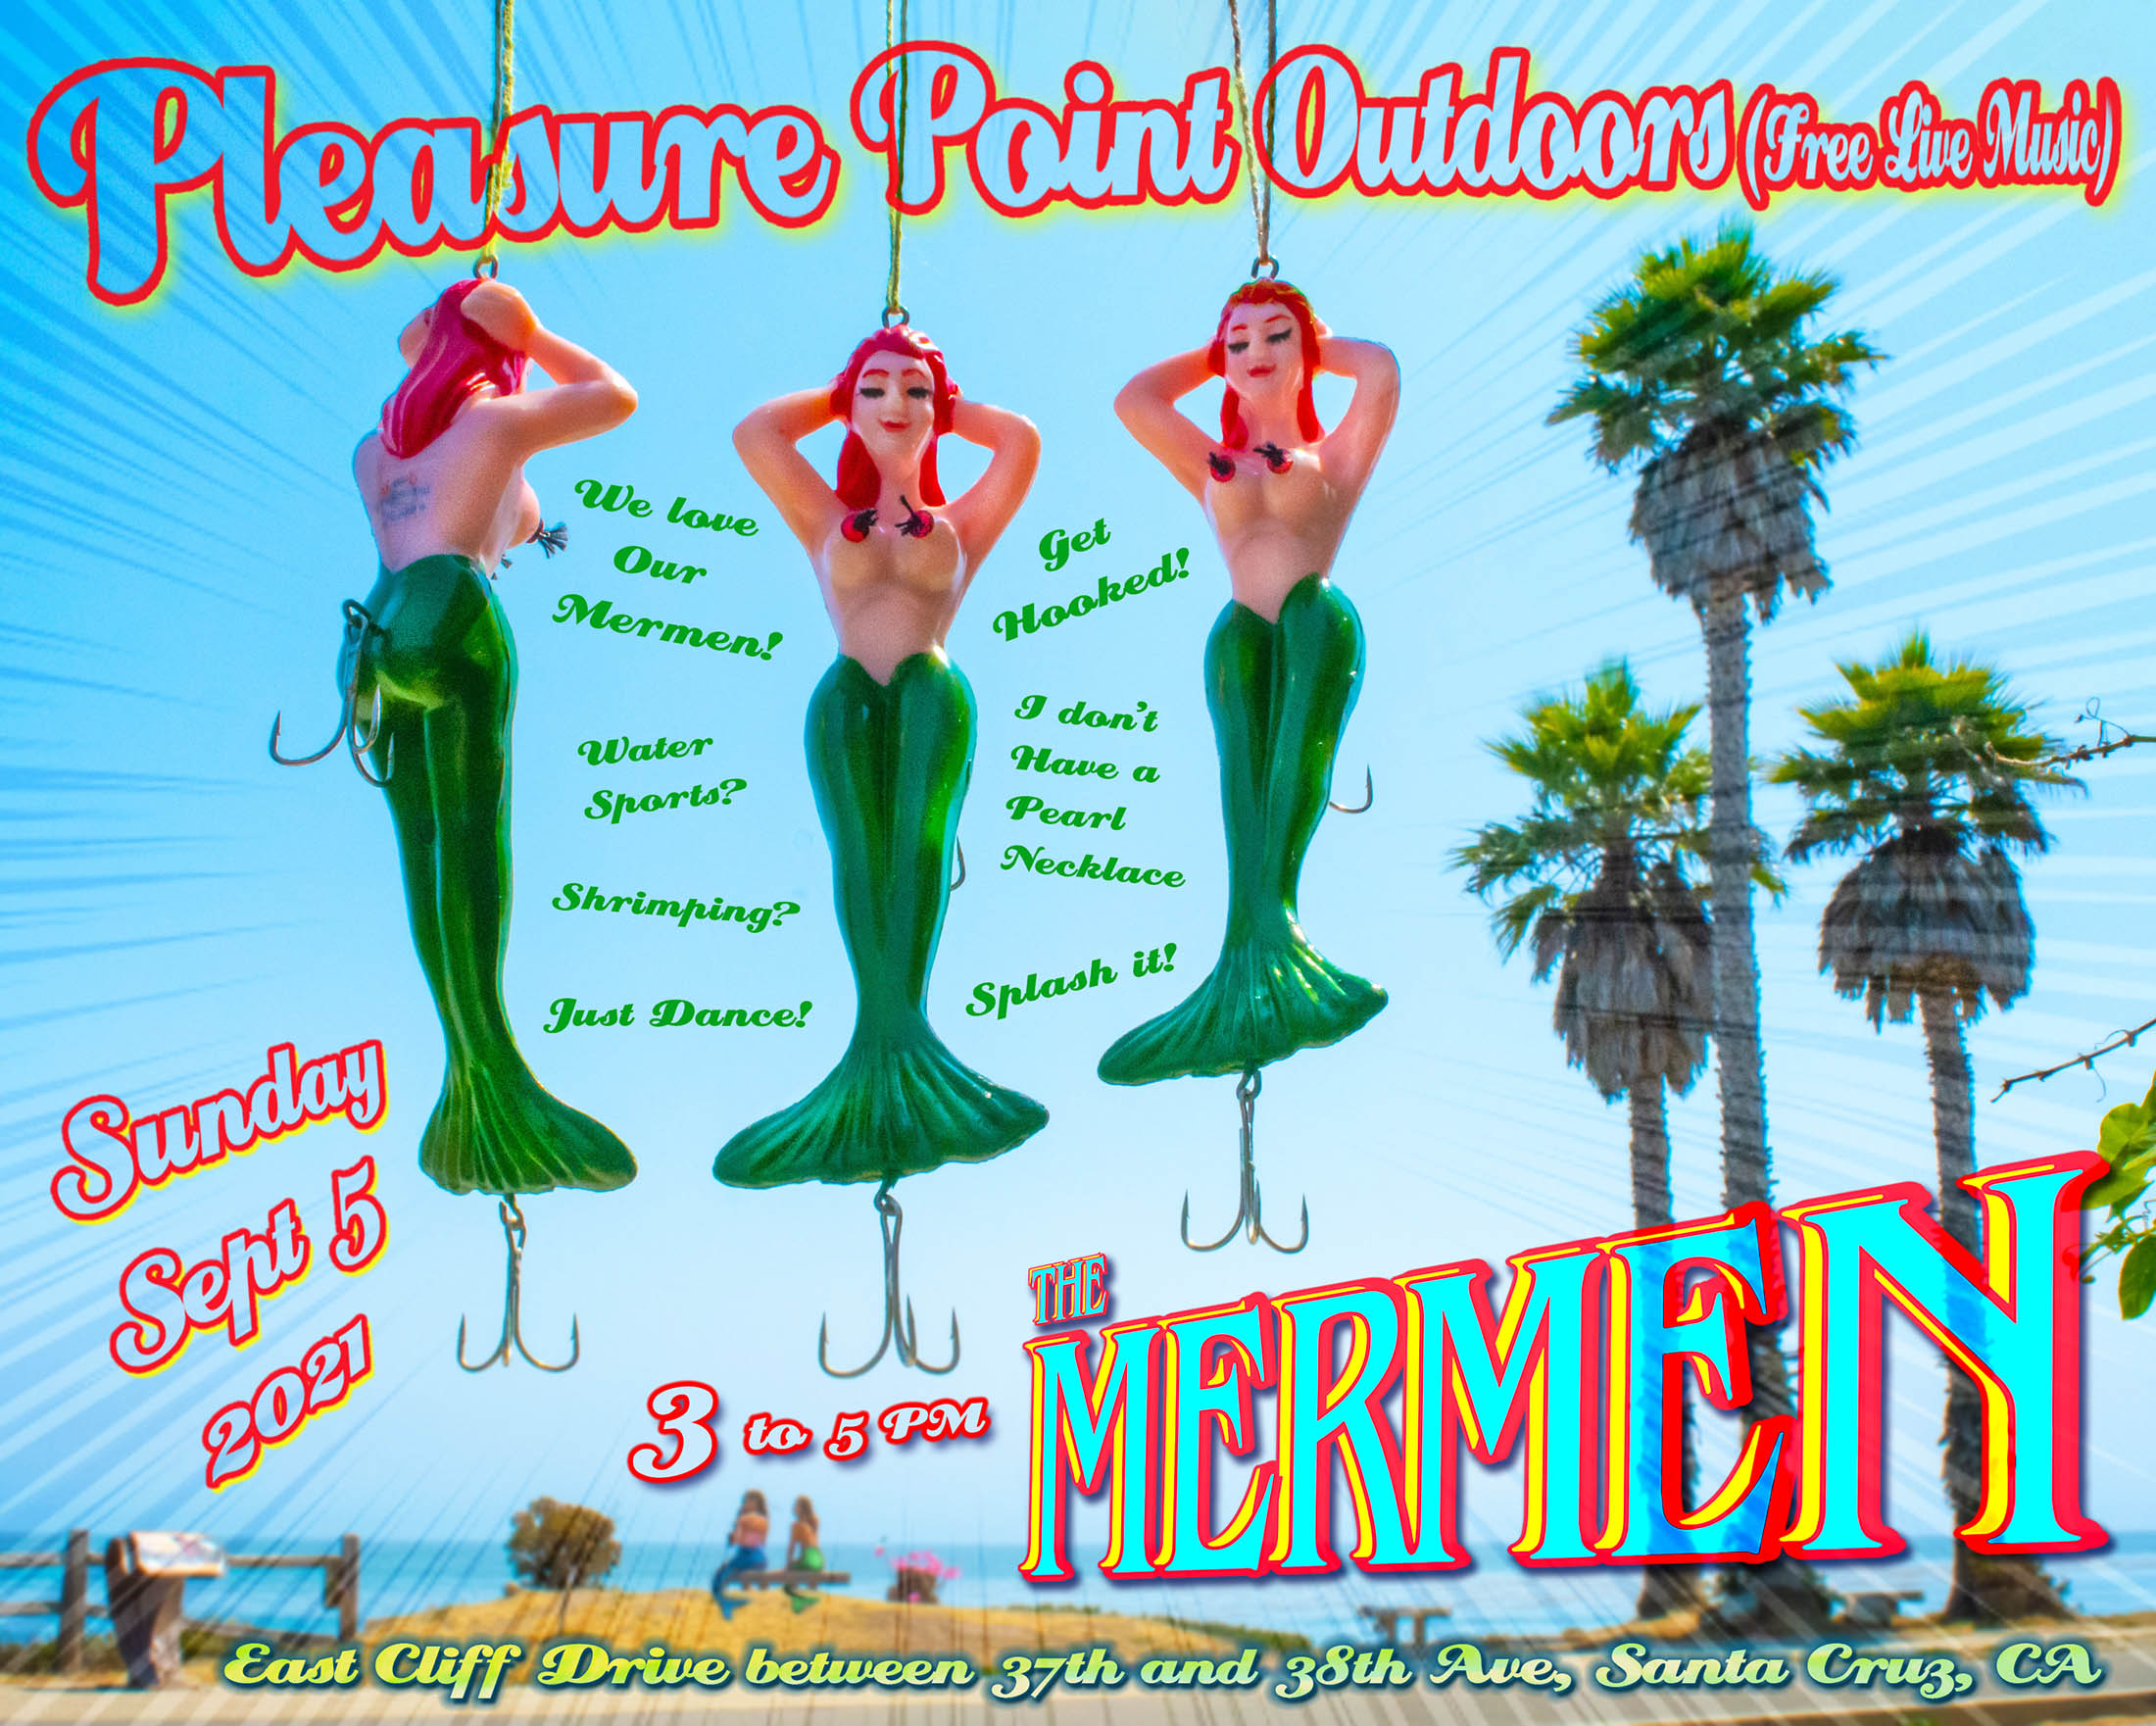 20210.9.5 The Mermen Pleasure Point Outdoors . photo and art by emi